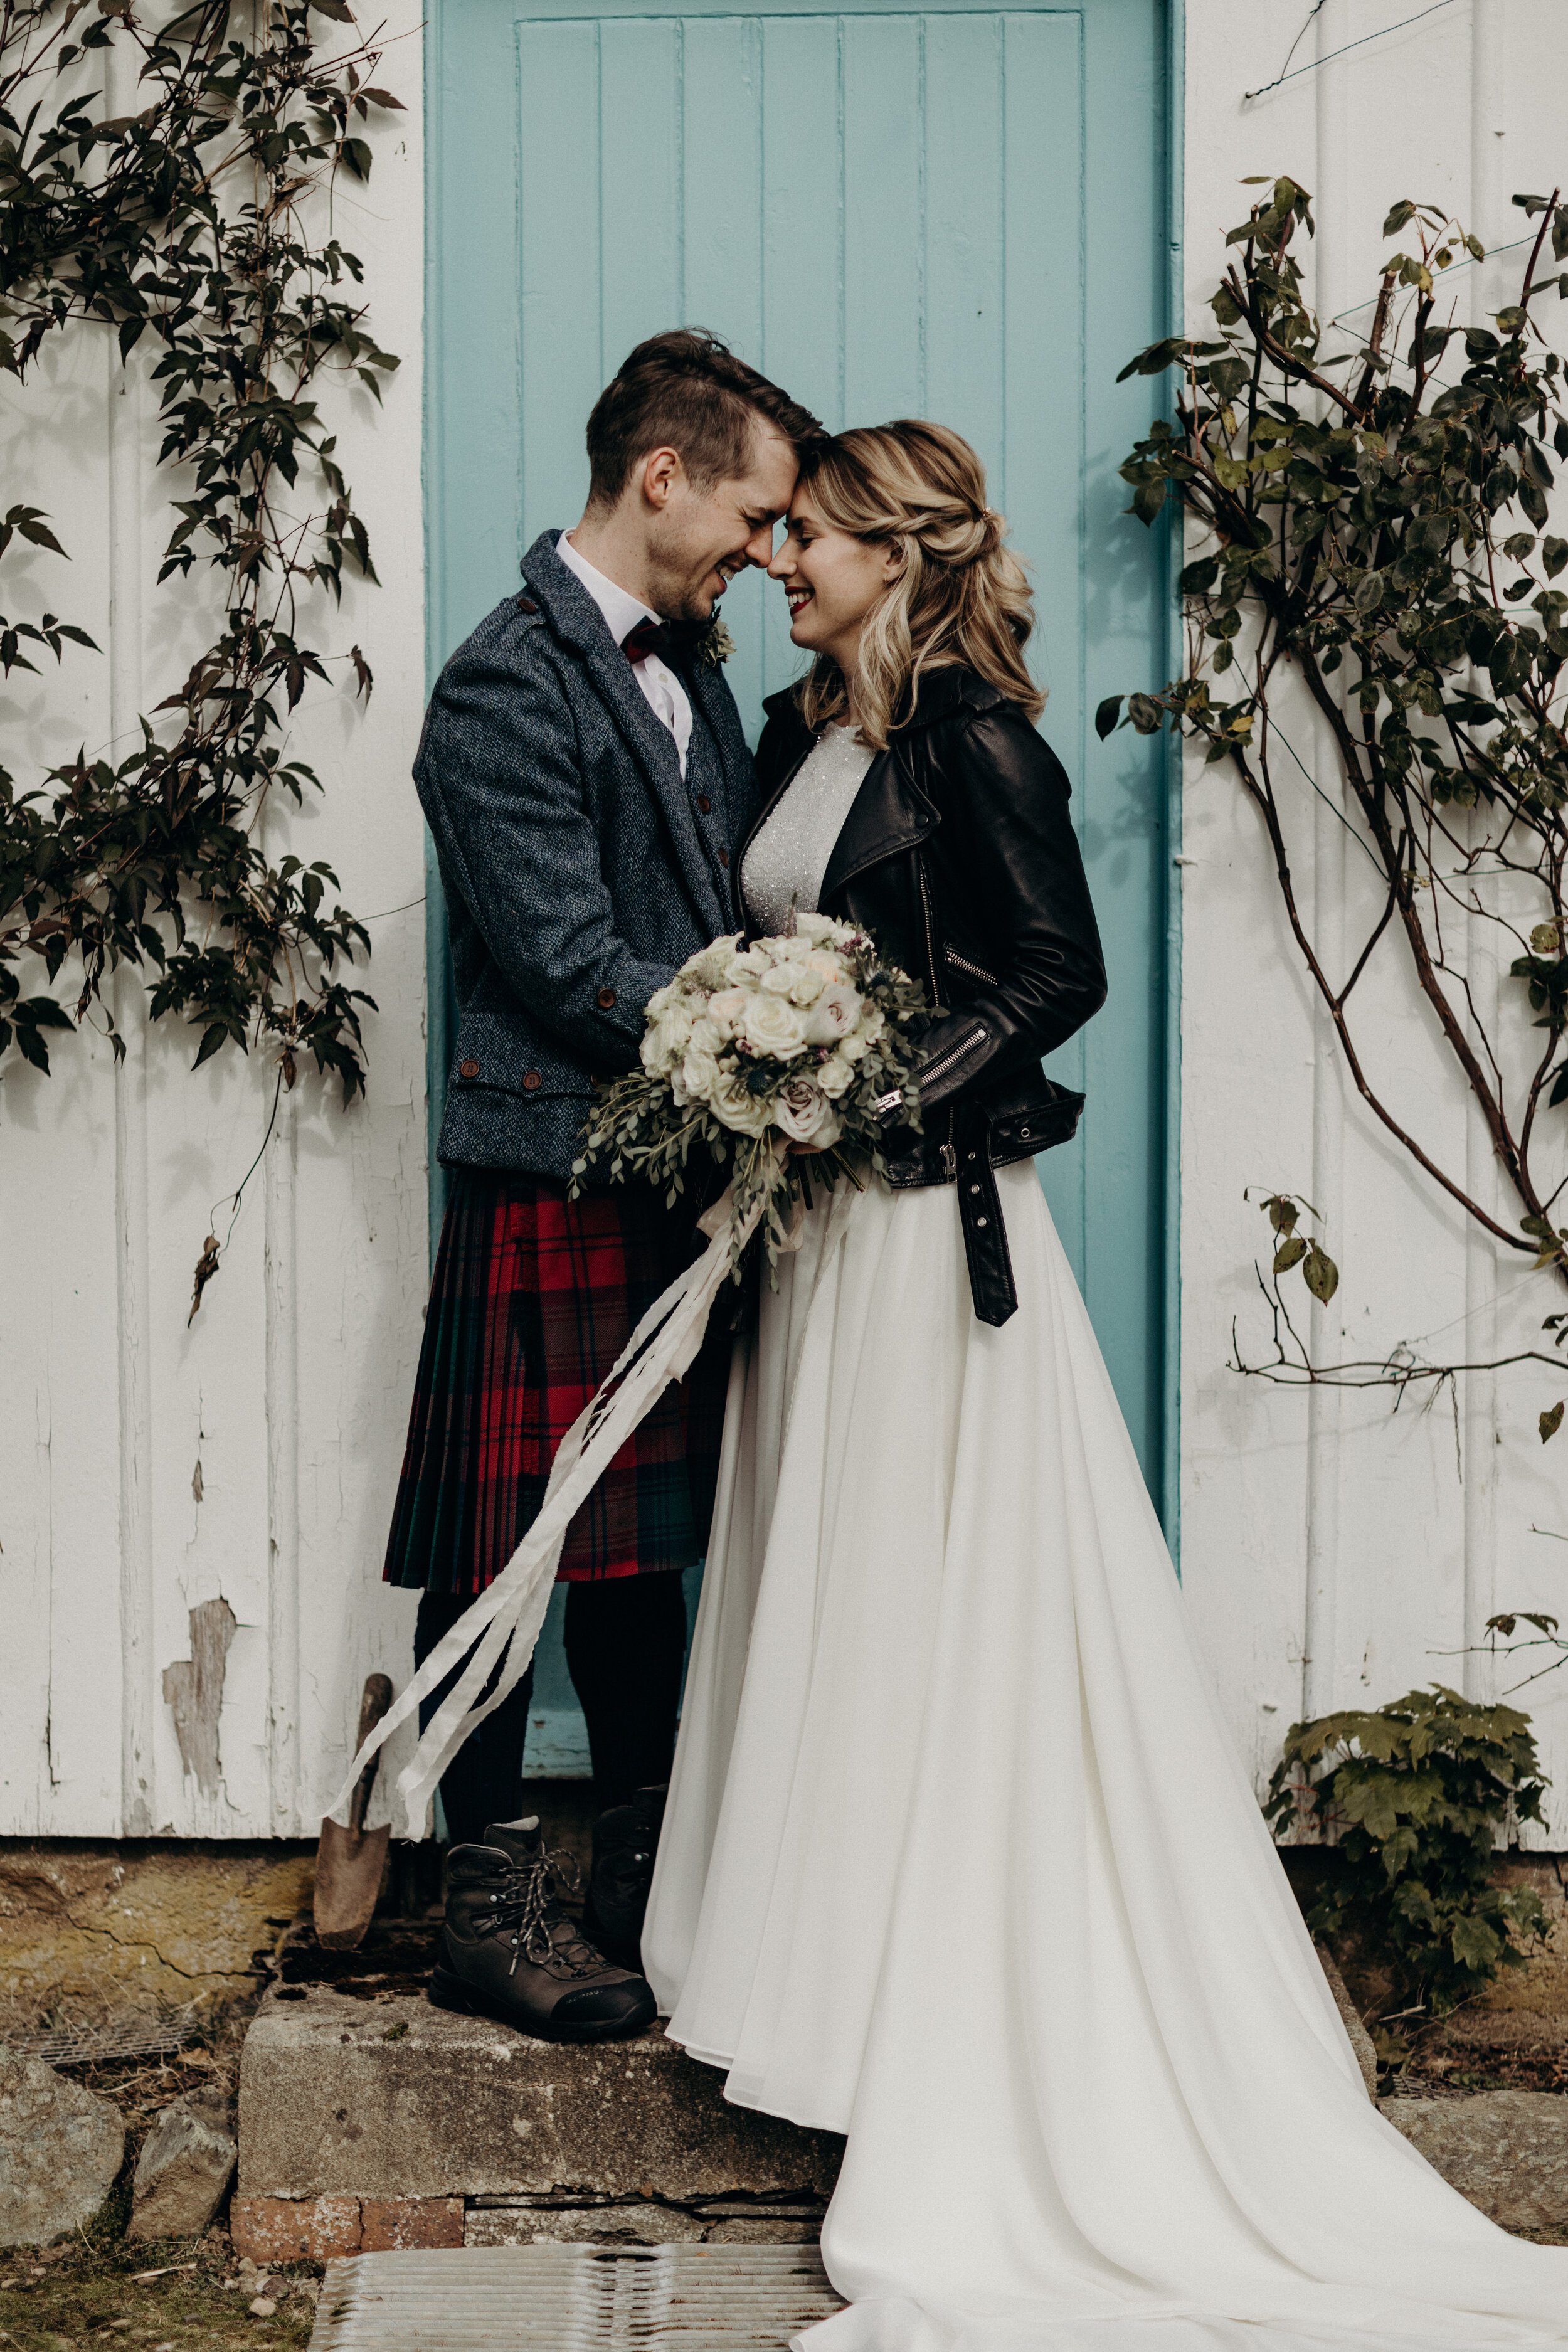 Bride in leather jacket and wedding gown holding bouquet of white roses in Dunkeld